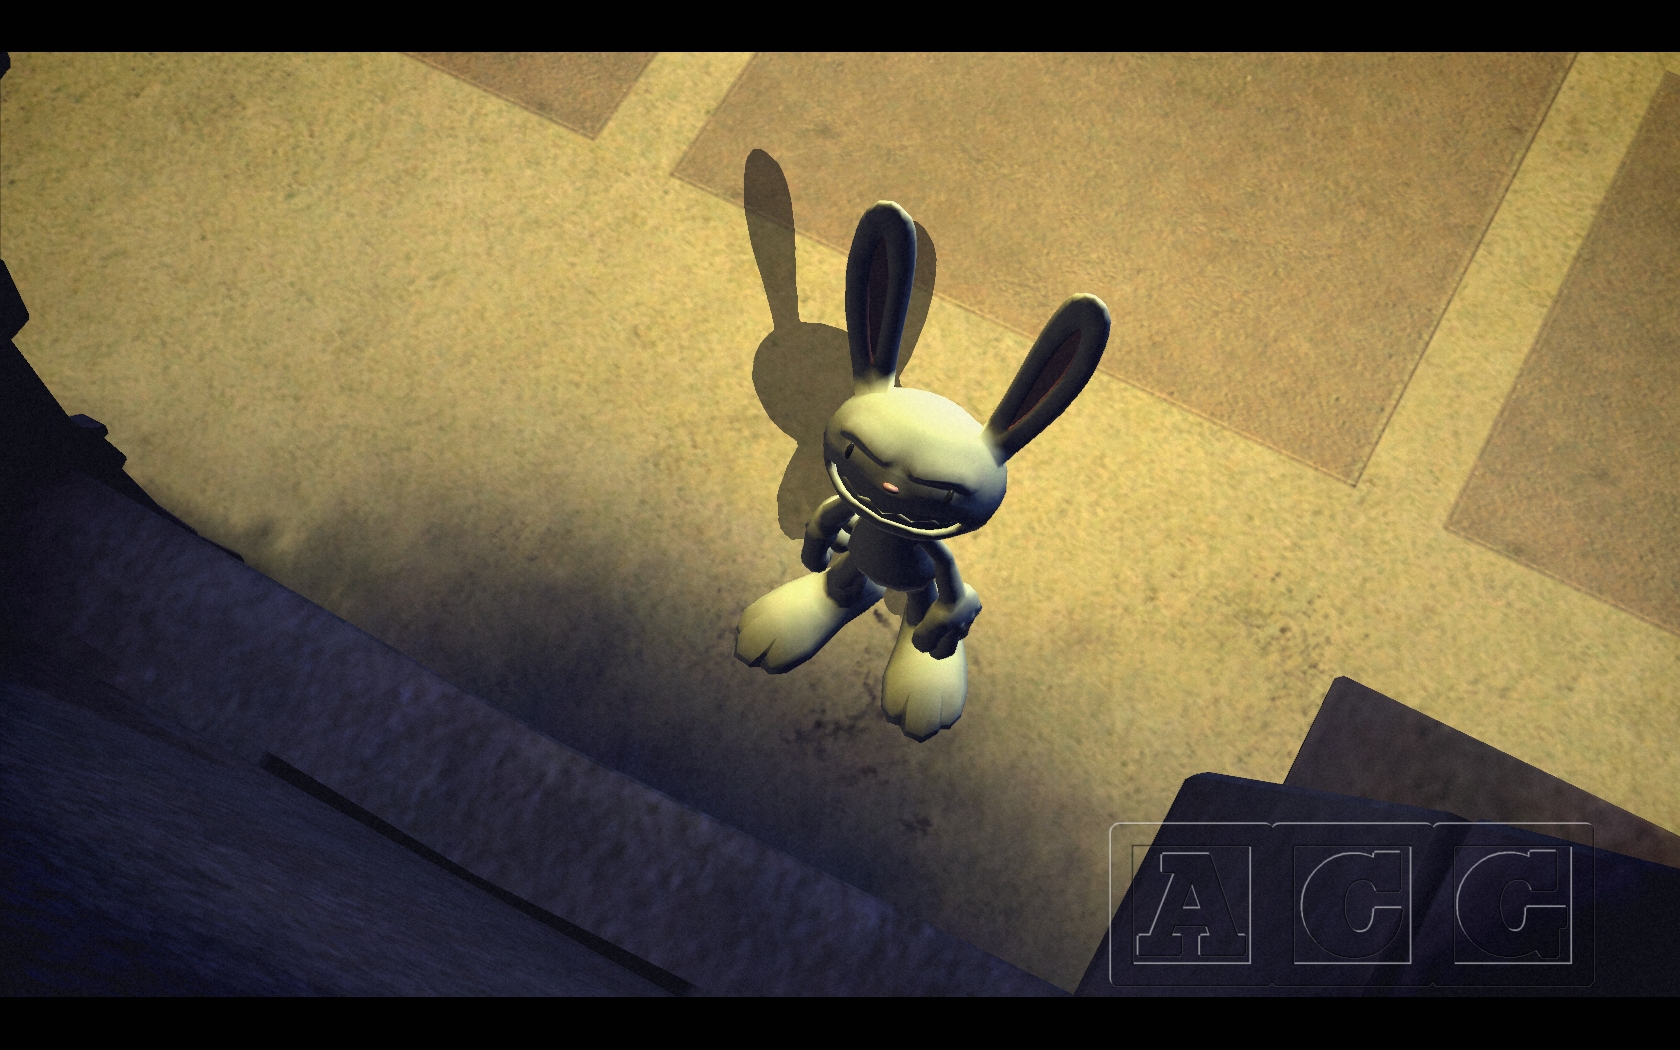 Sam & Max The Devil's Playhouse Episode 304: Beyond the Alley of the Dolls